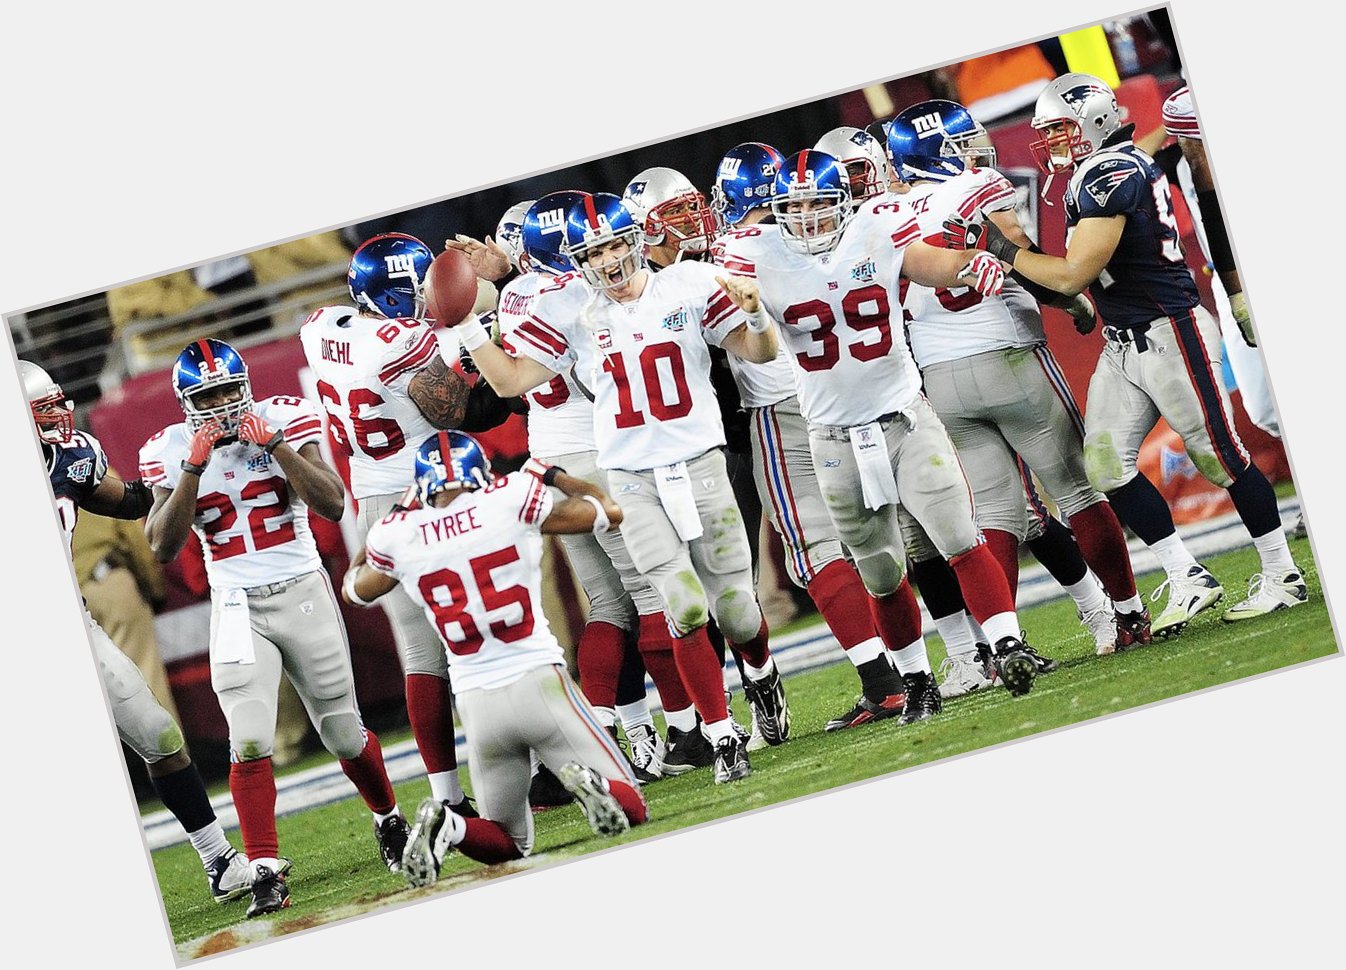 Happy birthday, David Tyree (38) and Eli Manning (37)! These guys know each other pretty well. 